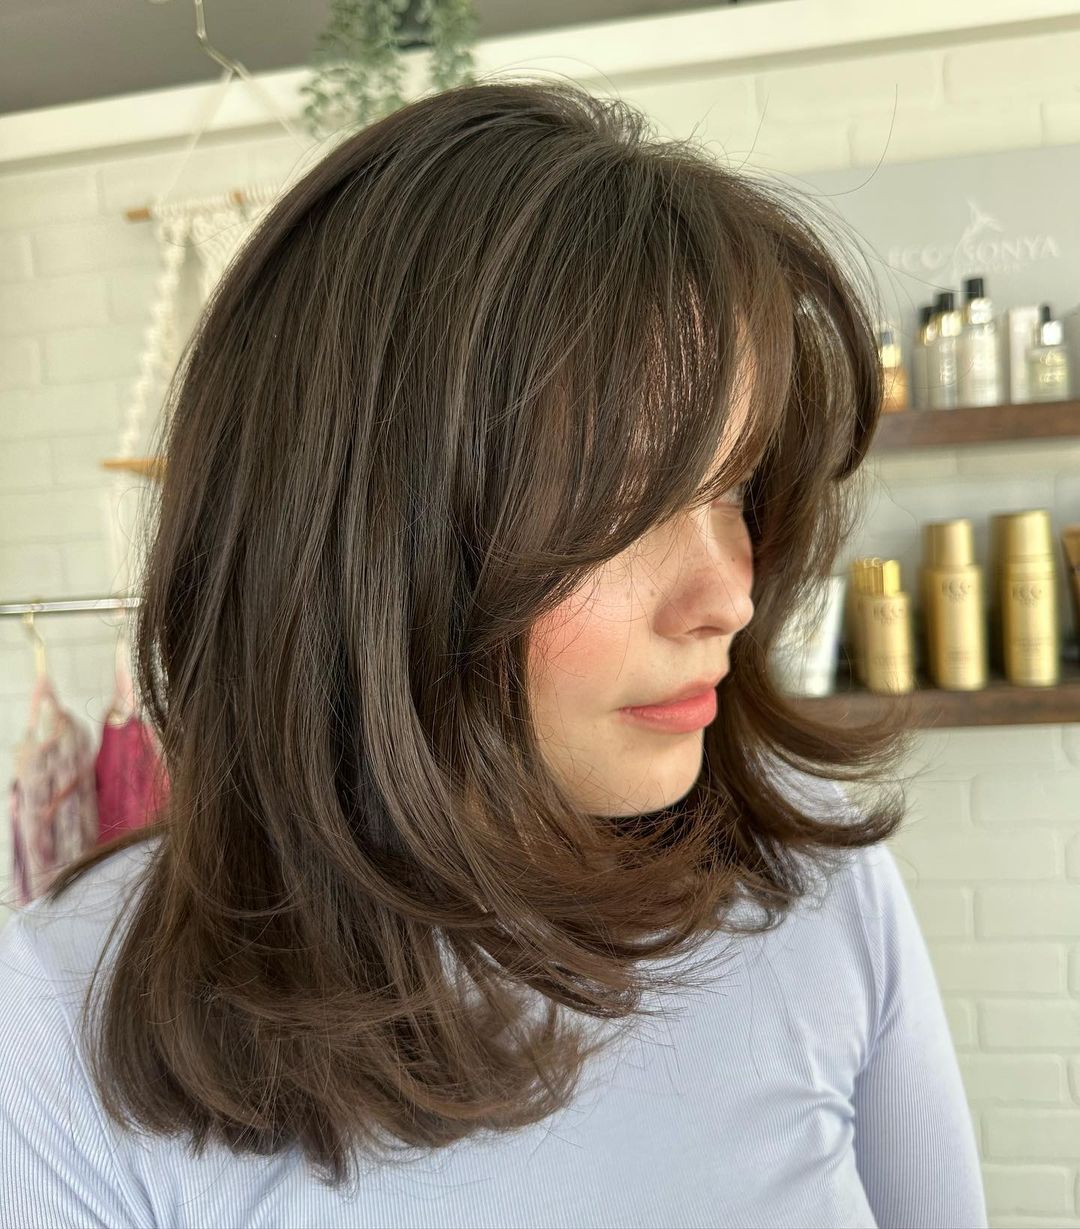 Medium Low Maintenance Style with Bangs for Thick Hair